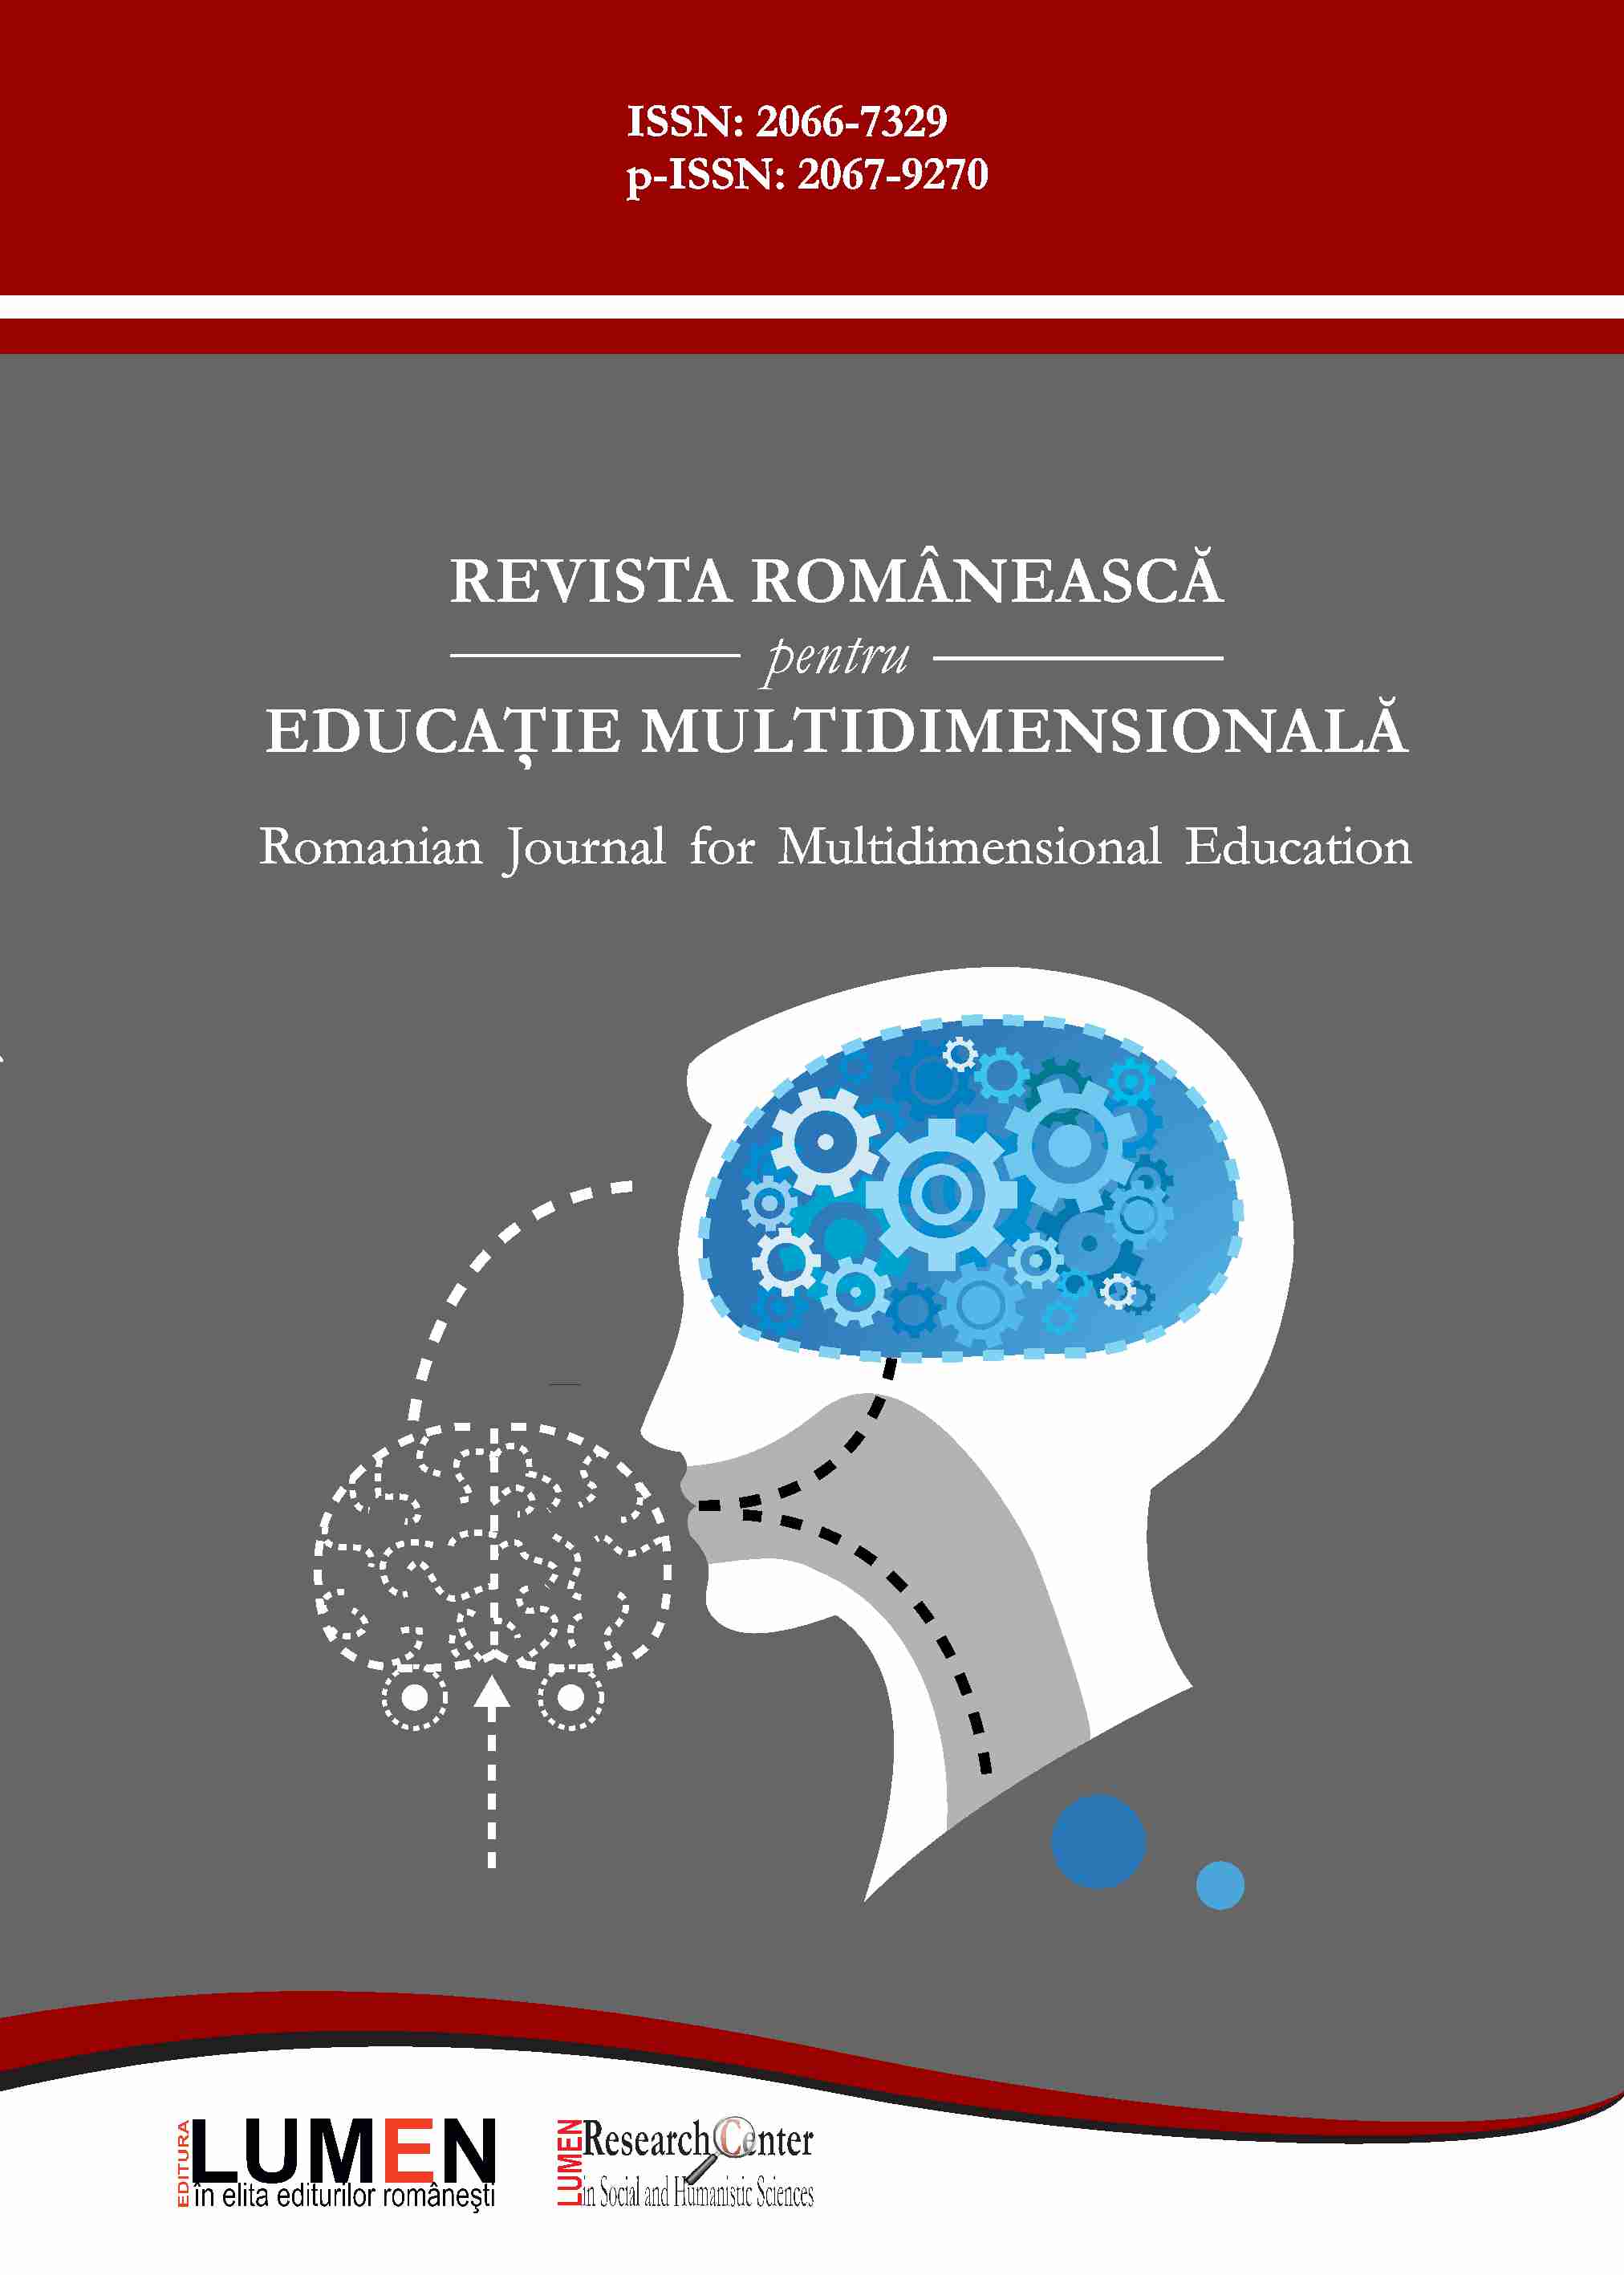 Integrality in Multidimensionality- a Reflection on Contemporary Education Cover Image